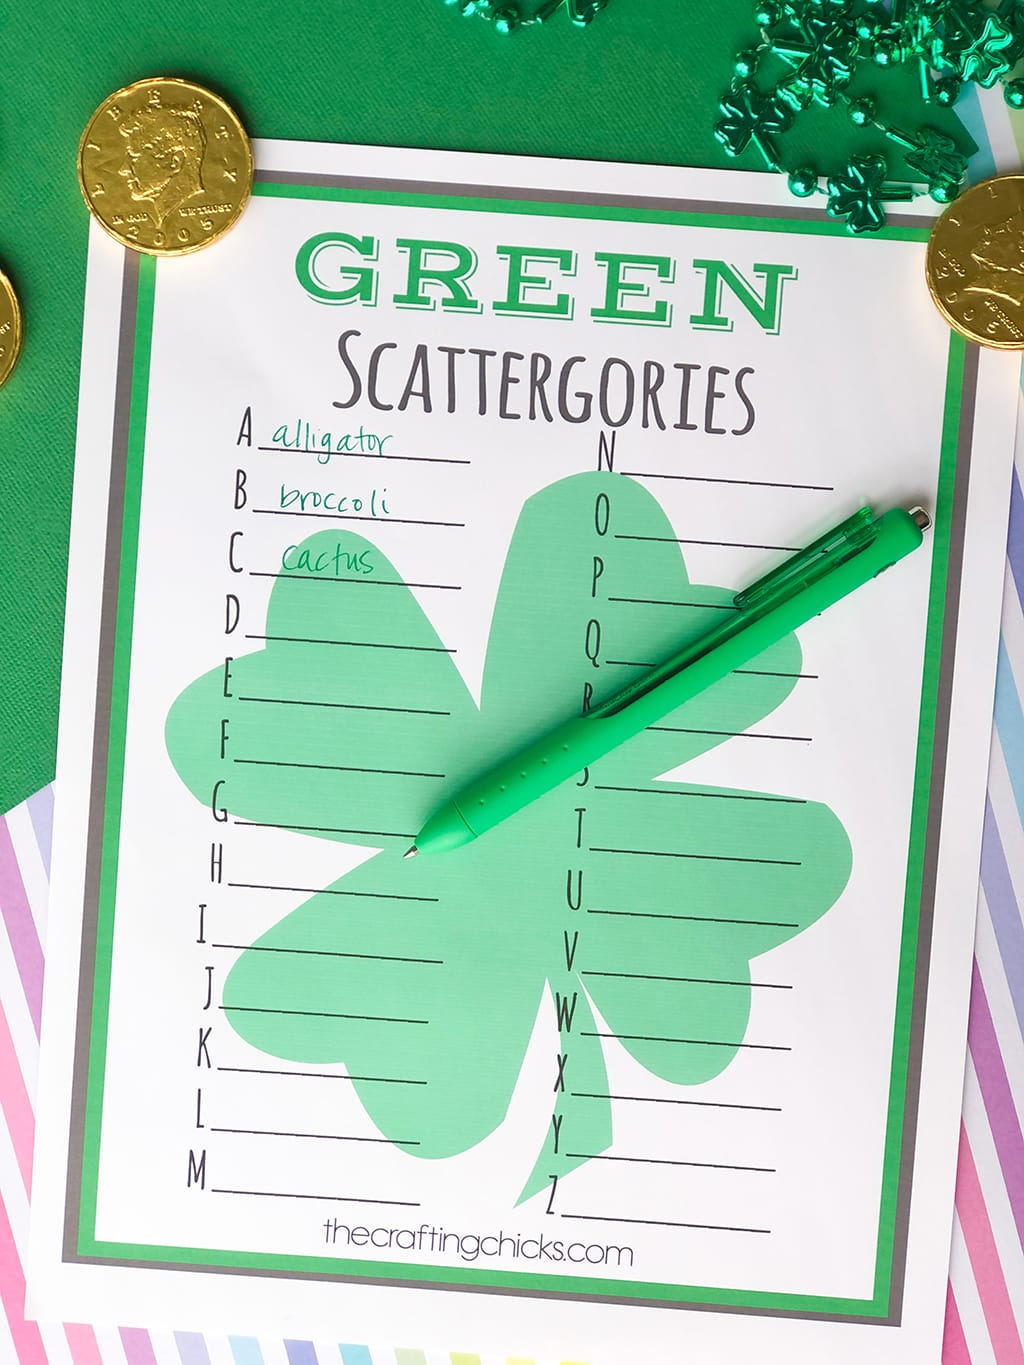 St. Patrick's Day GREEN Scattergories *Free Printable on green and rainbow background with gold coins